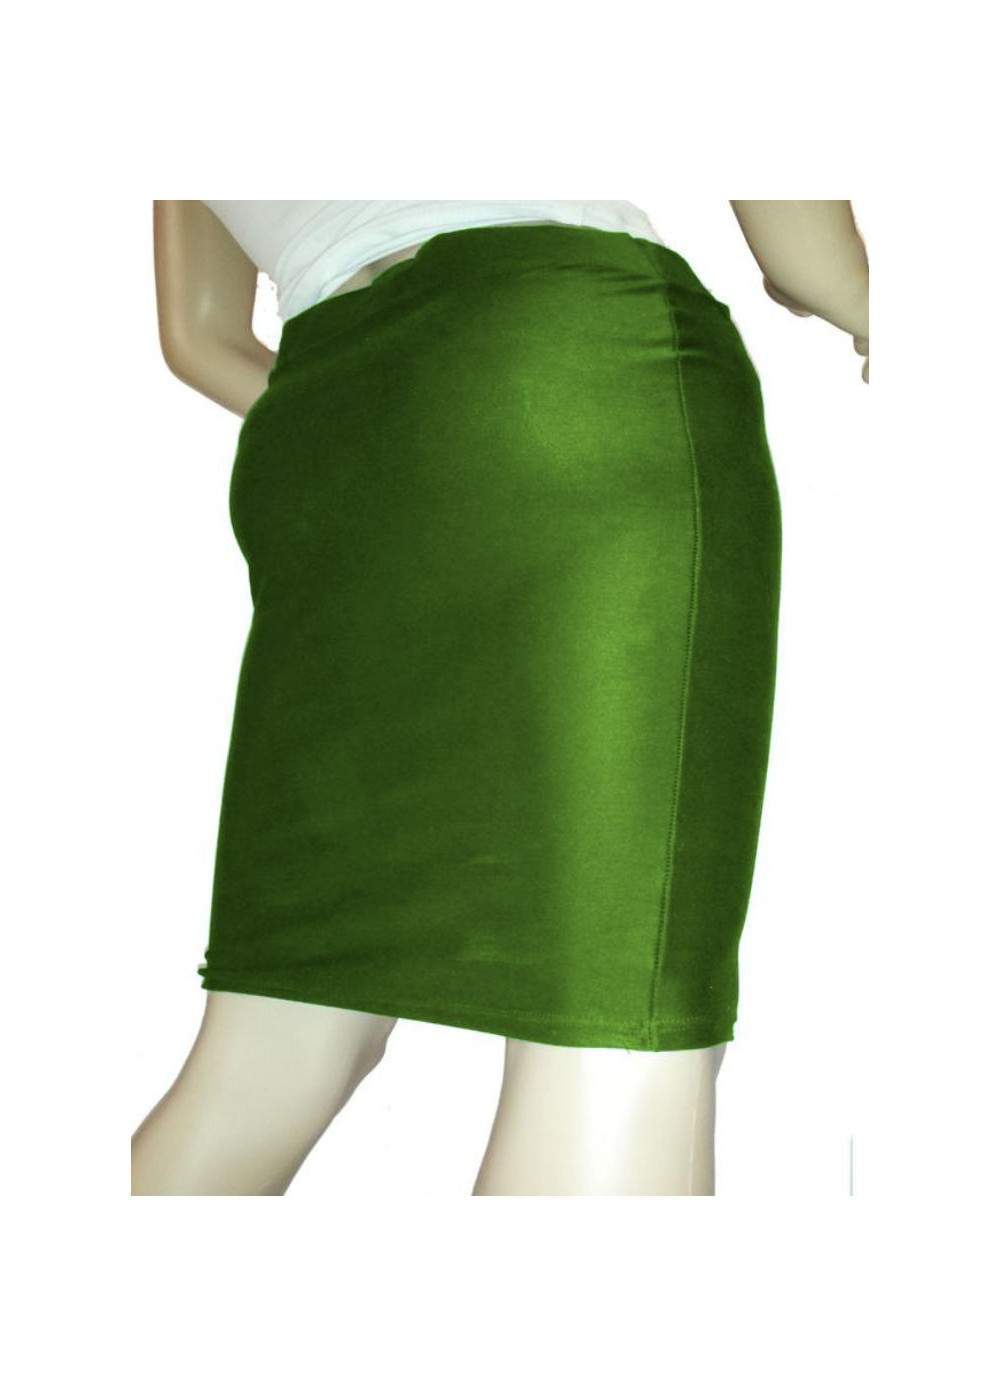 Save 15 percent on Green Knee Long Stretch Skirt Sizes 44 - 52 - 